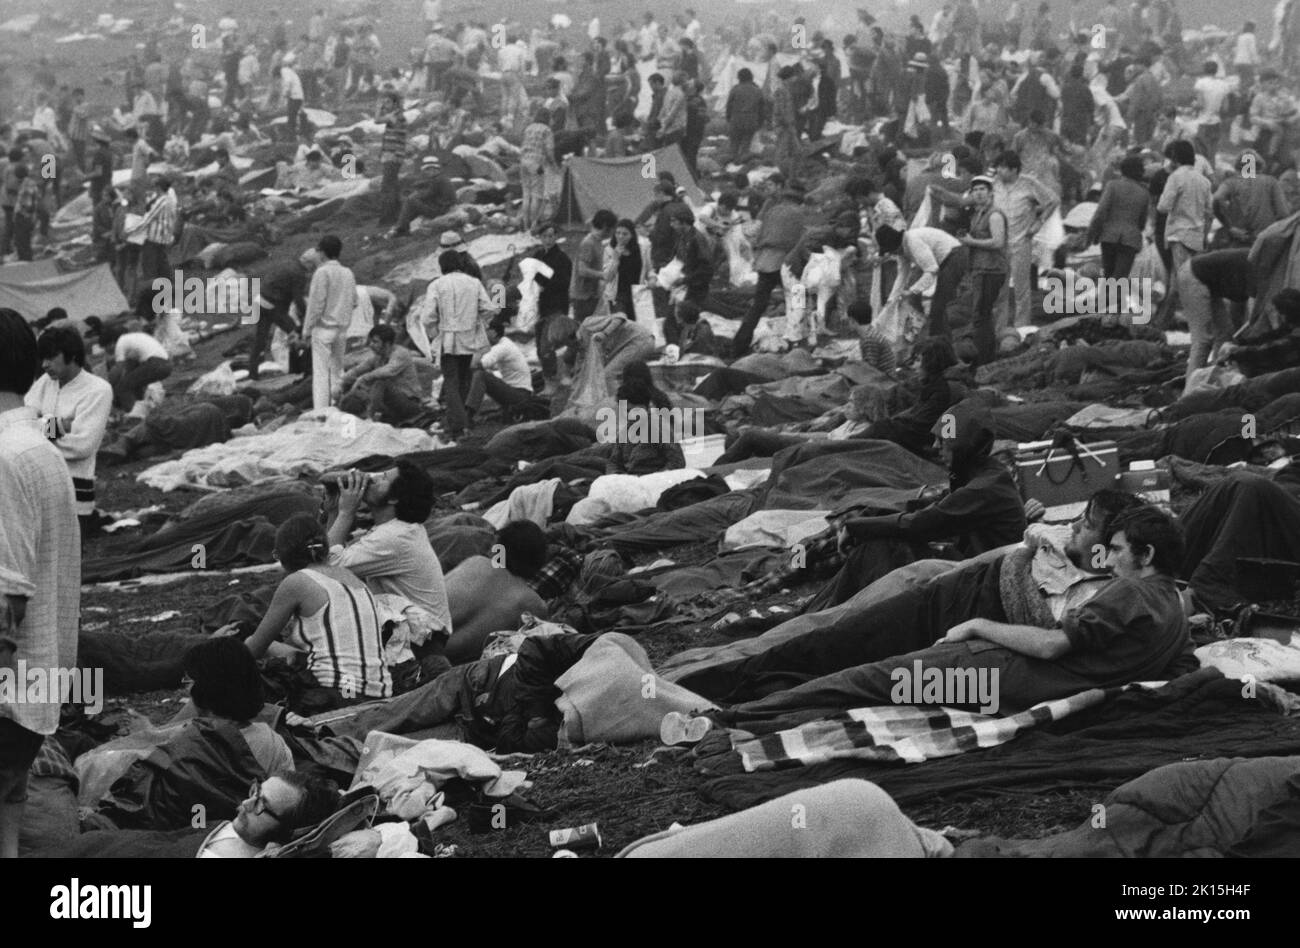 A look at part of the crowd at the Woodstock Music Festival; 1969. Stock Photo